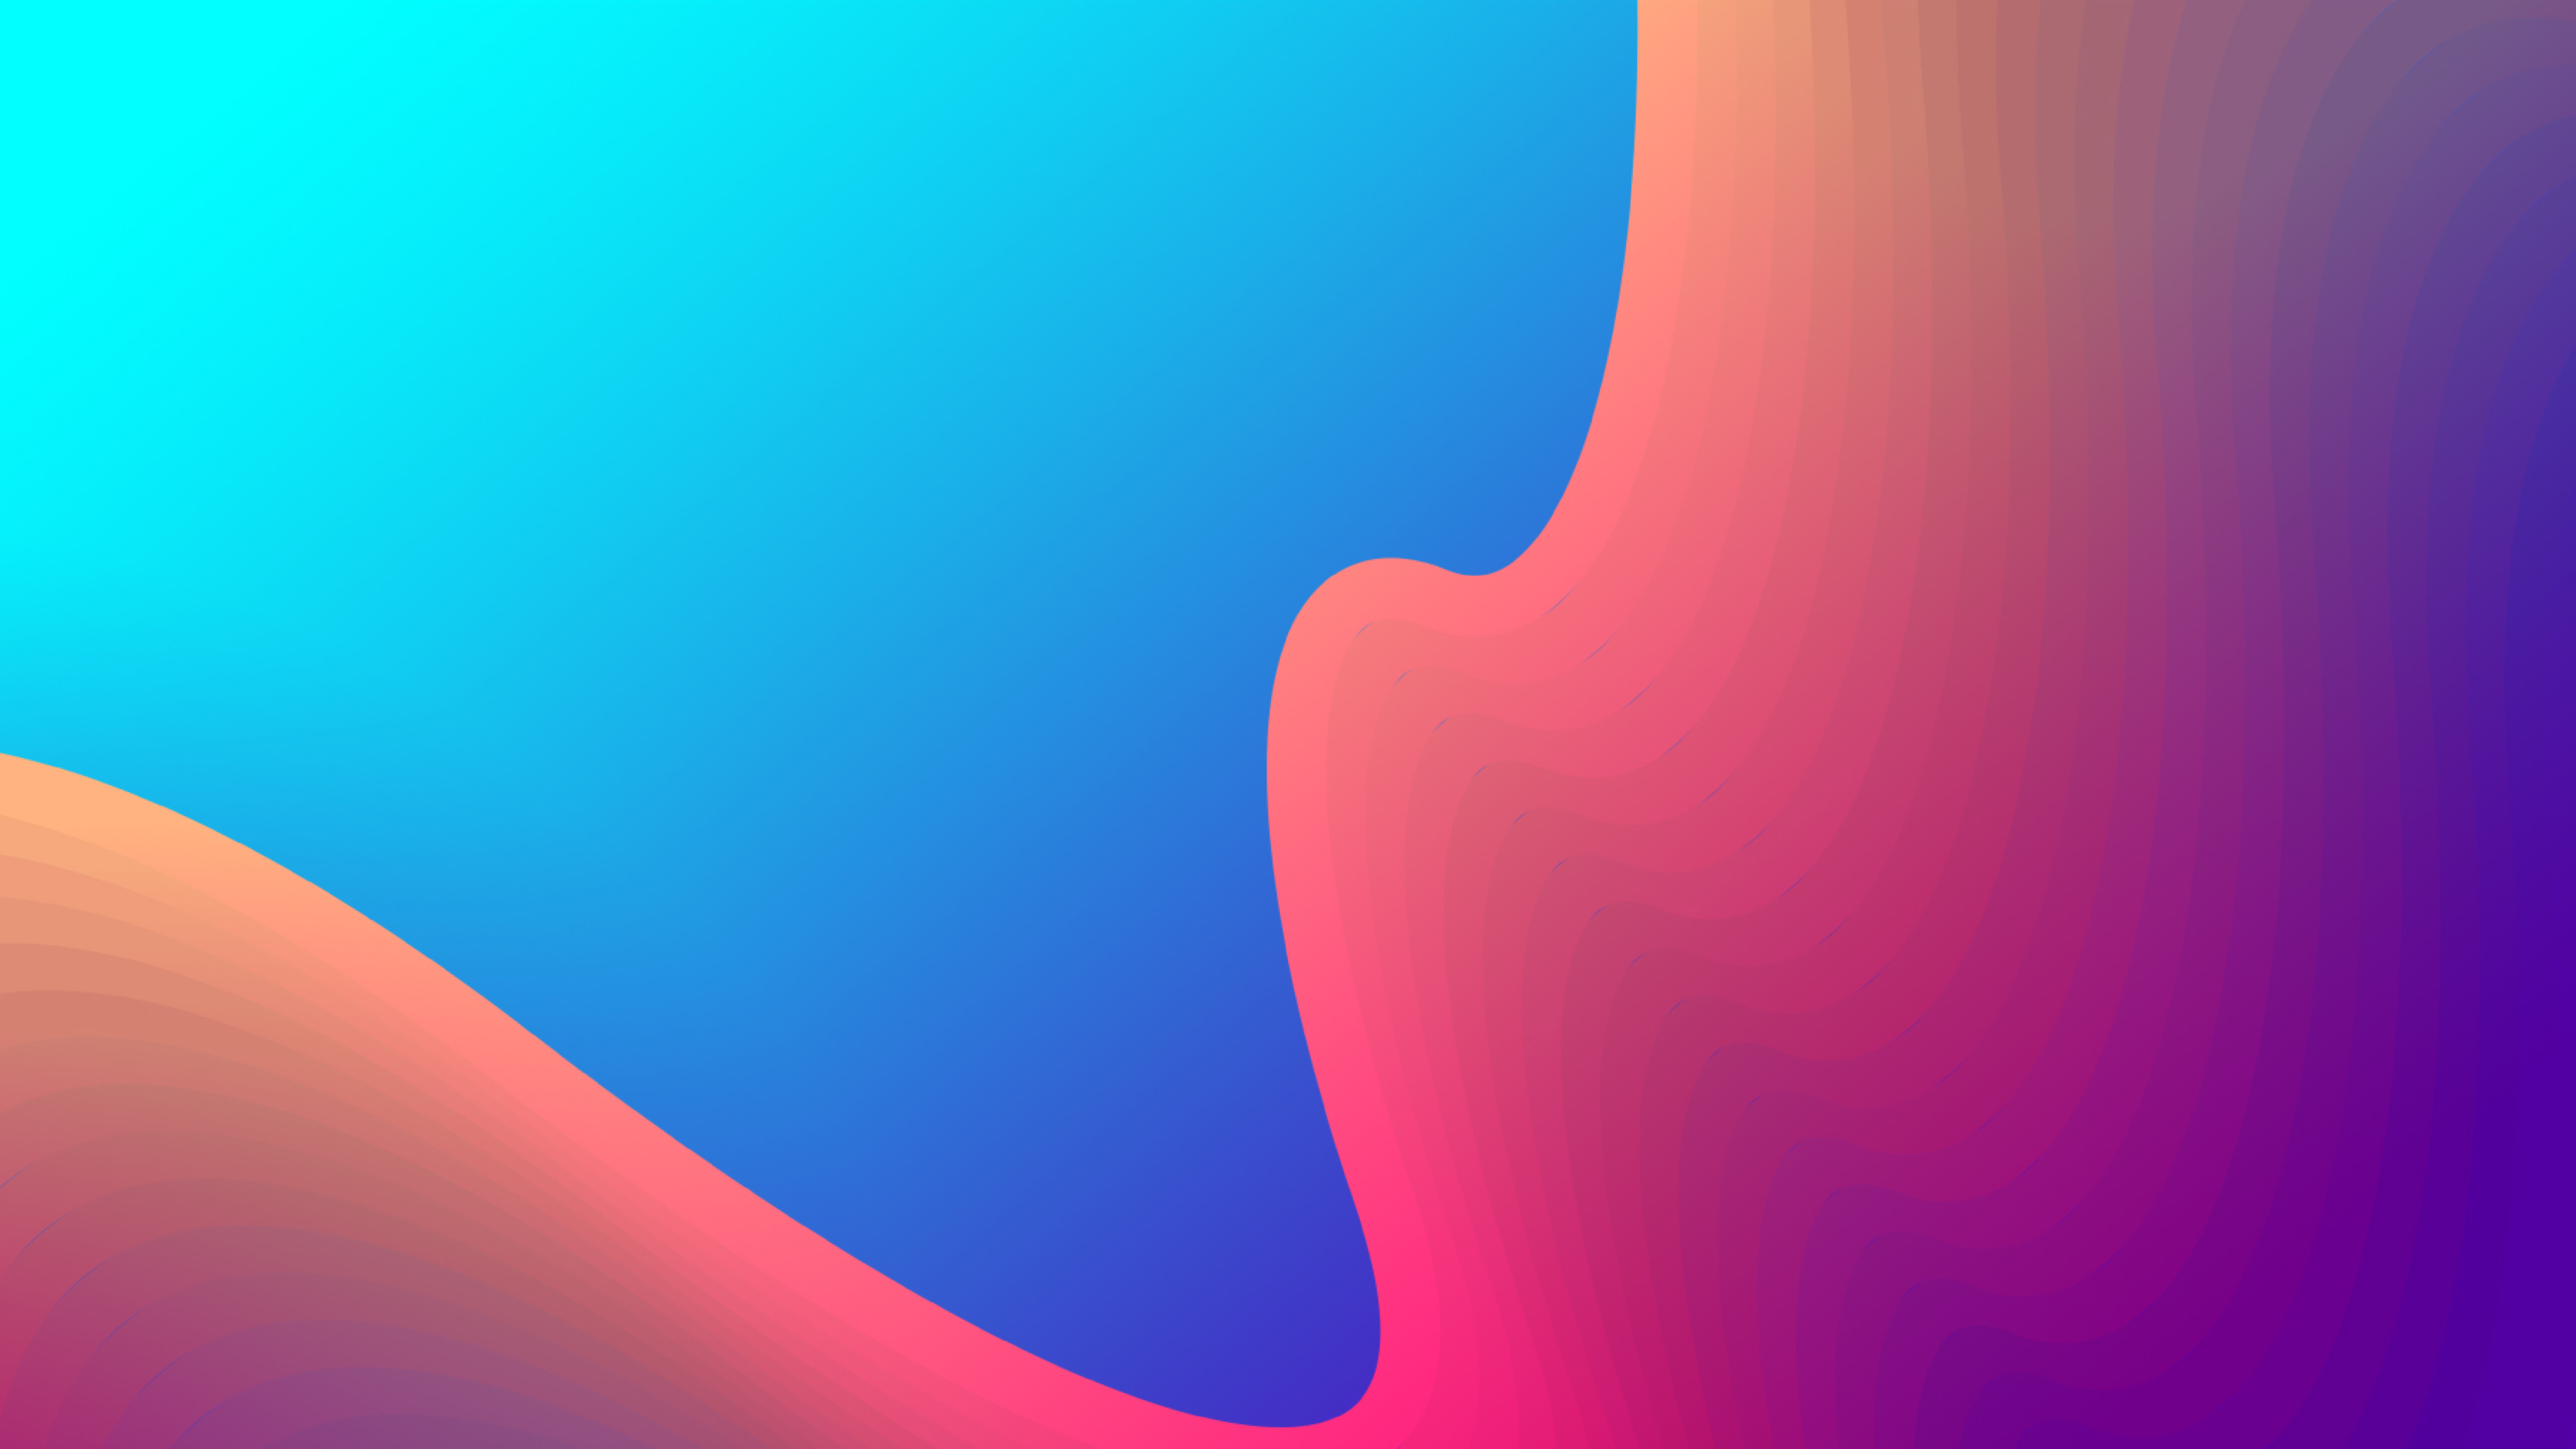 7680x43 Orange Blue Gradient Mix 8k Wallpaper Hd Abstract 4k Wallpapers Images Photos And Background Wallpapers Den